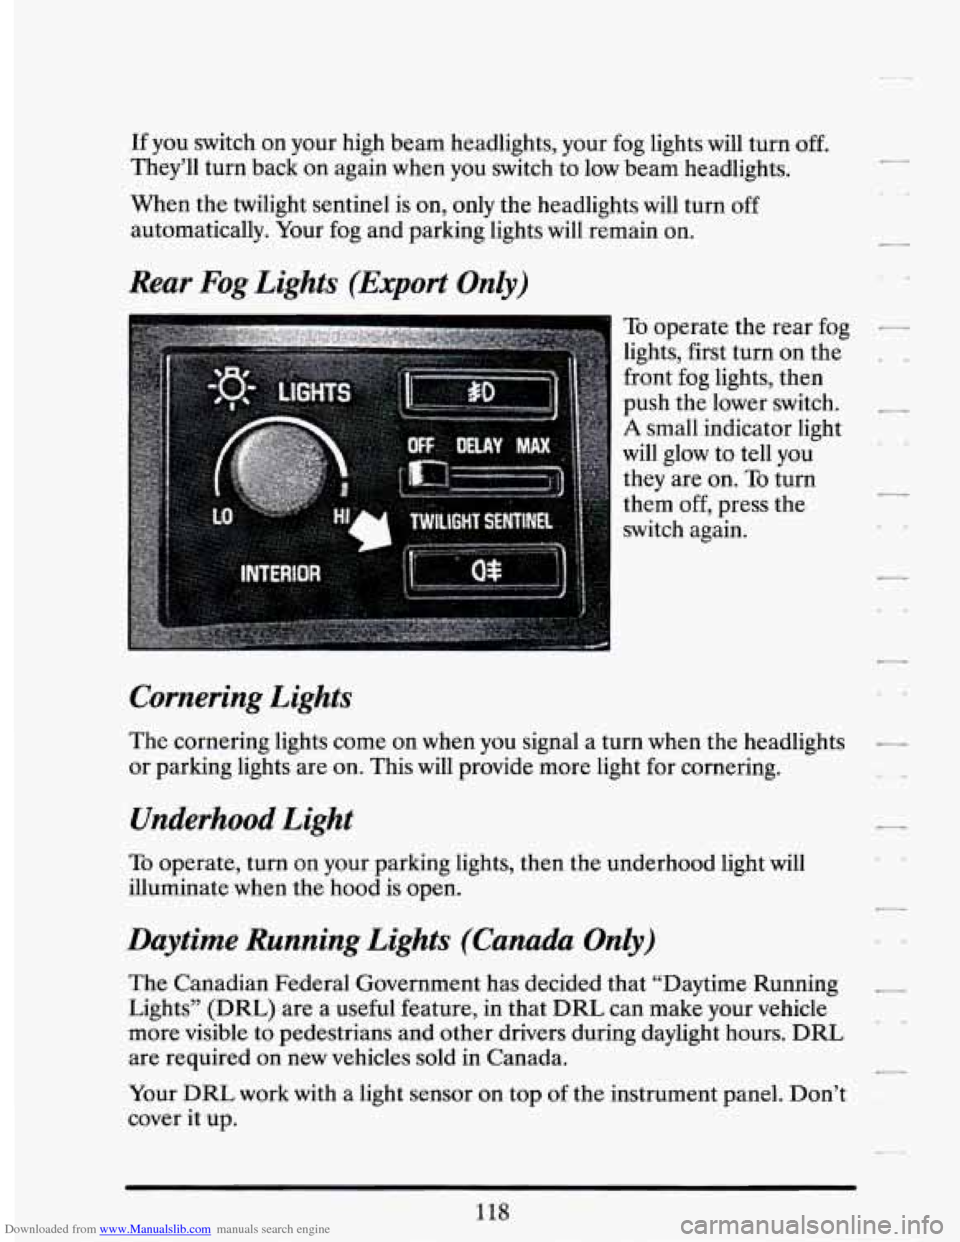 CADILLAC SEVILLE 1994 4.G Owners Manual Downloaded from www.Manualslib.com manuals search engine If you  switch  on  your  high  beam  headlights,  your  fog  lights  will \
turn off. 
They’ll turn back  on  again  when  you  switch  to l